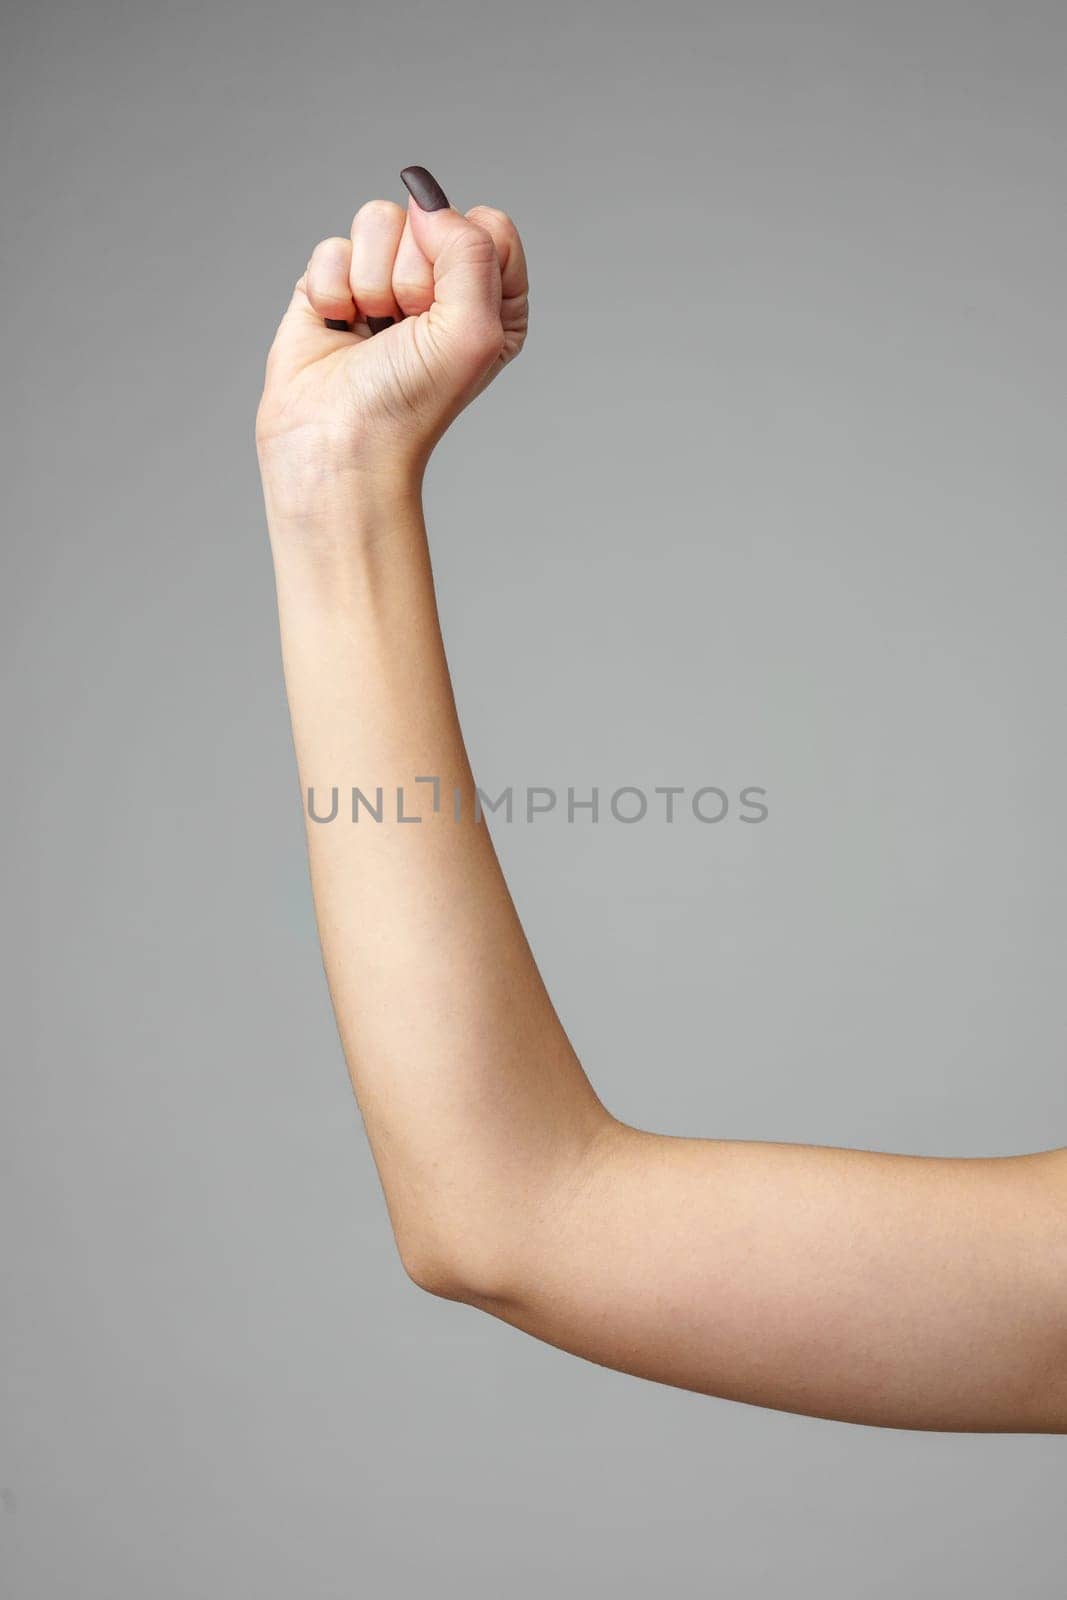 Raised Human Arm Exhibiting Strength and Determination Against a Neutral Background by Fabrikasimf